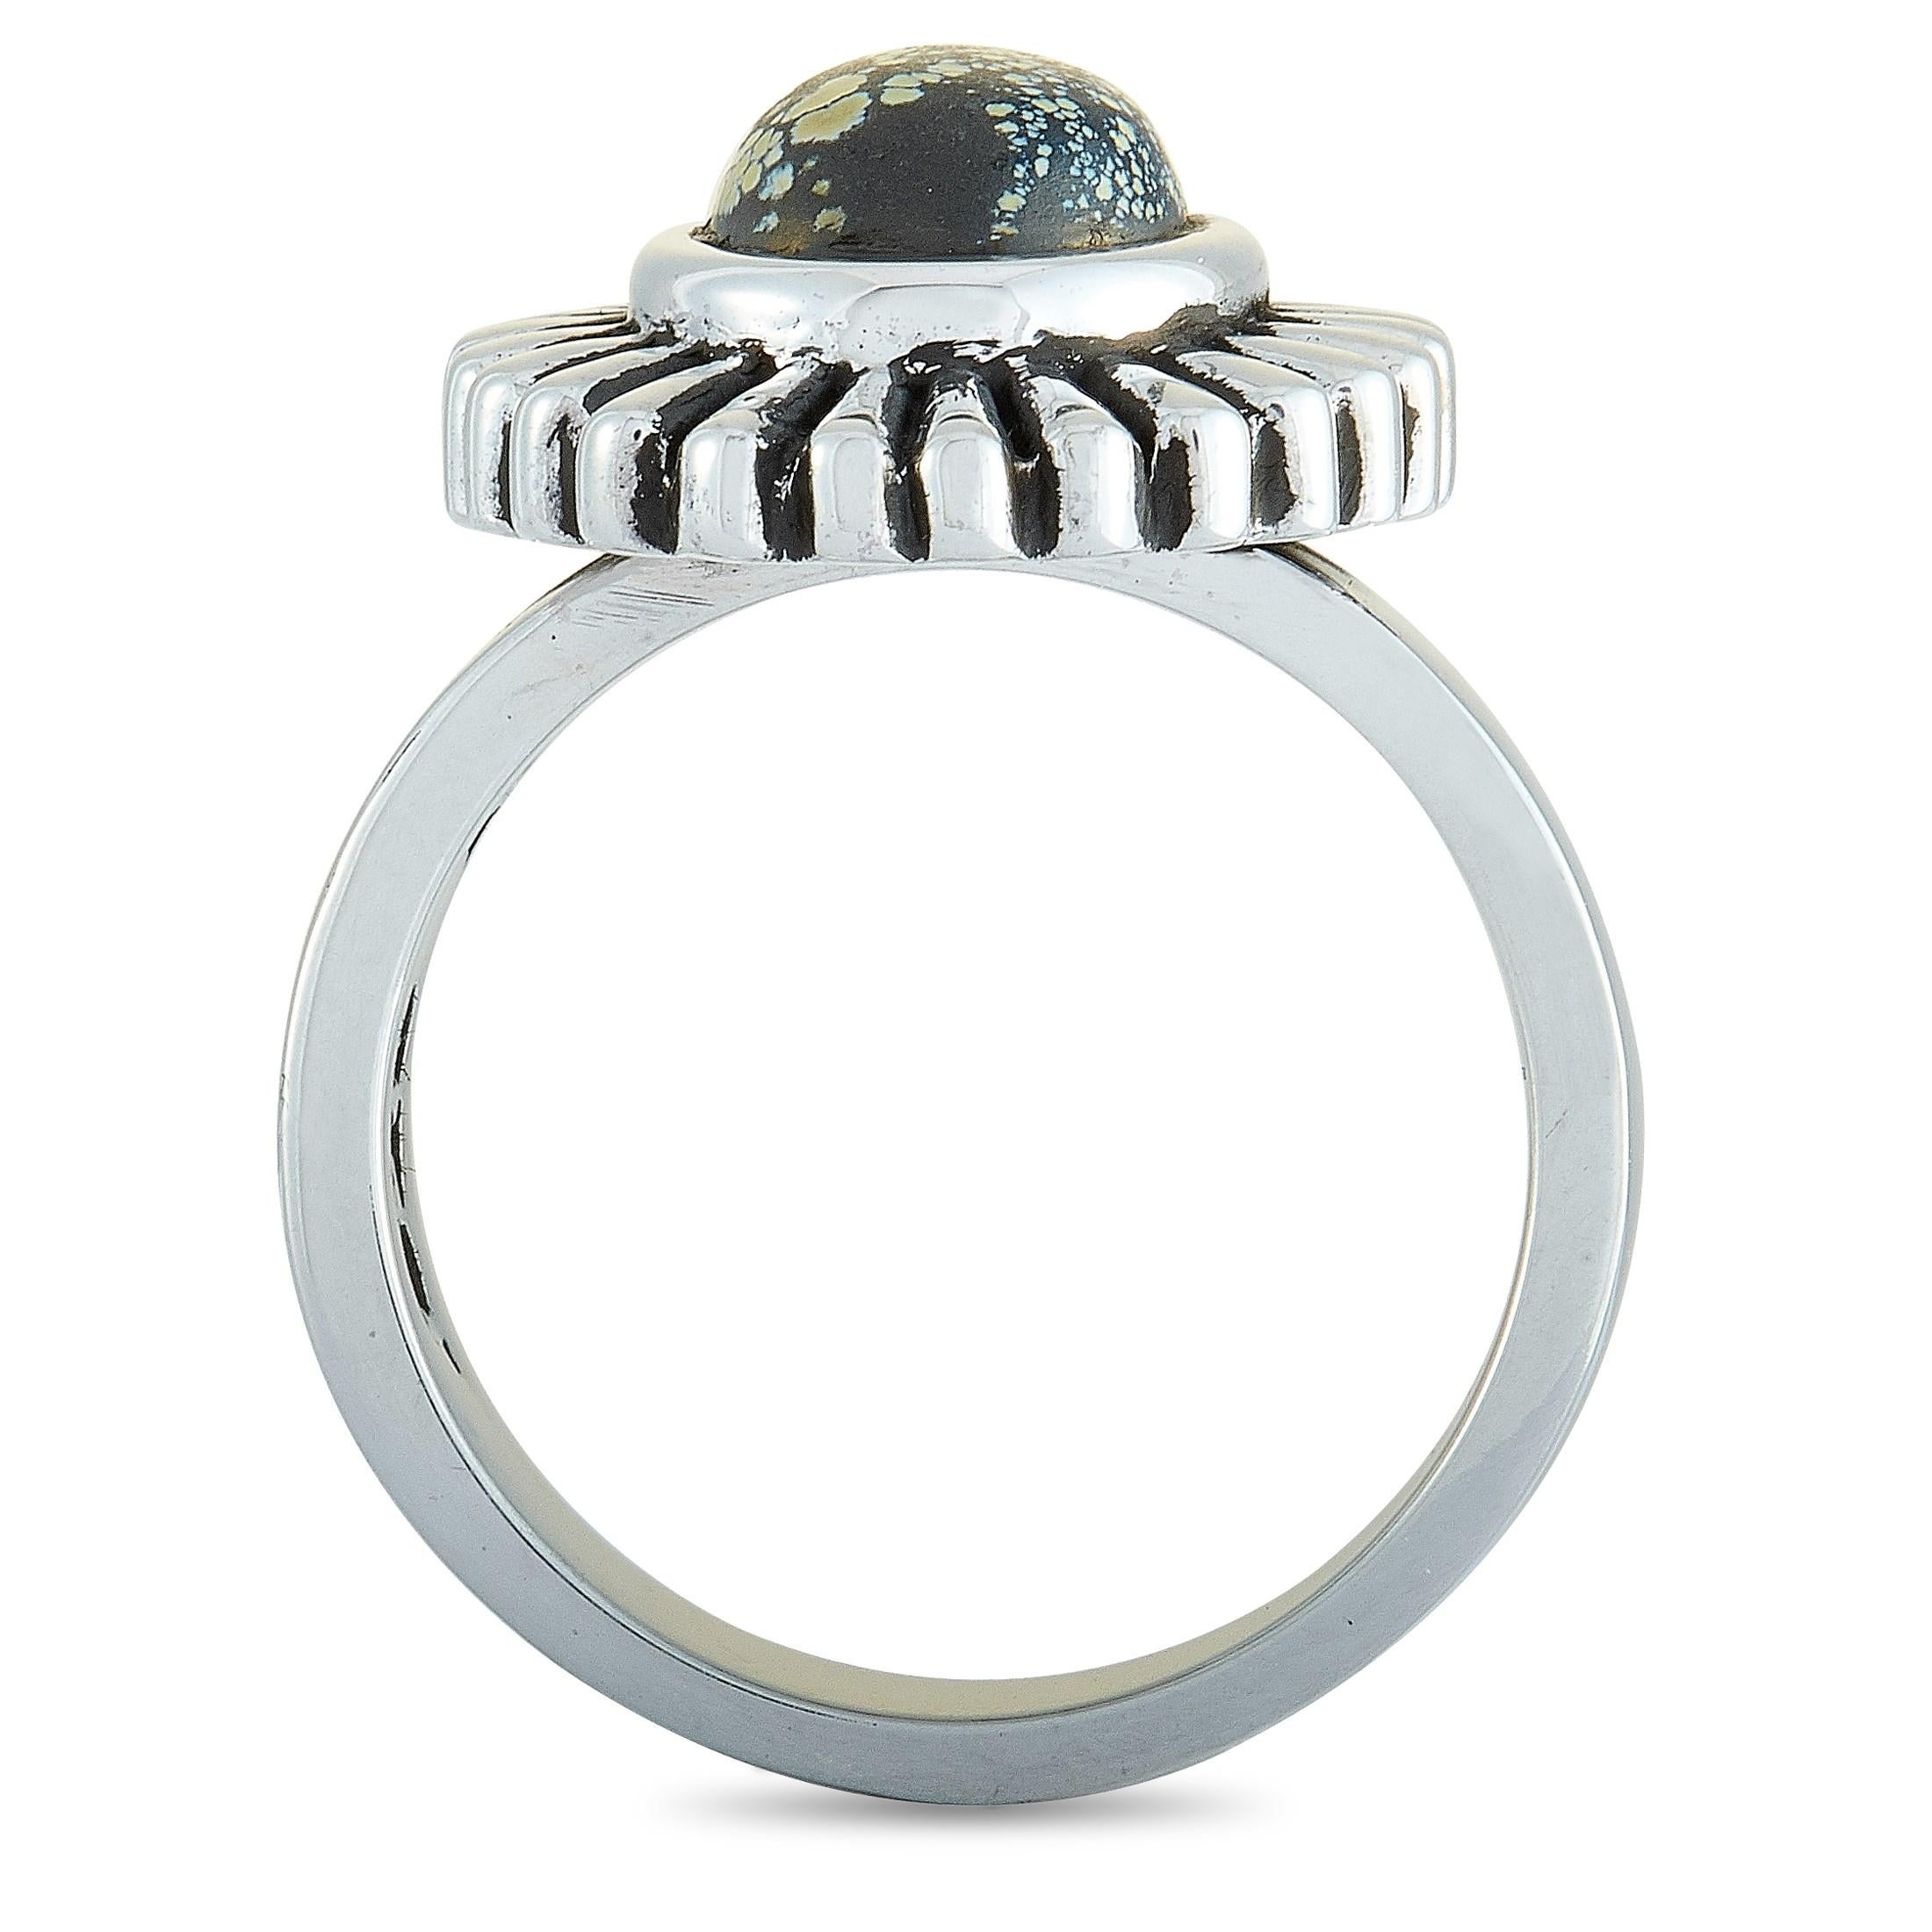 The King Baby “Small Starburst Concho” ring is crafted from silver and set with an 8 by 10 mm spotted turquoise. The ring weighs 15 grams and boasts a band thickness of 5 mm and a top height of 8 mm, while top dimensions measure 17 by 21 mm.

This